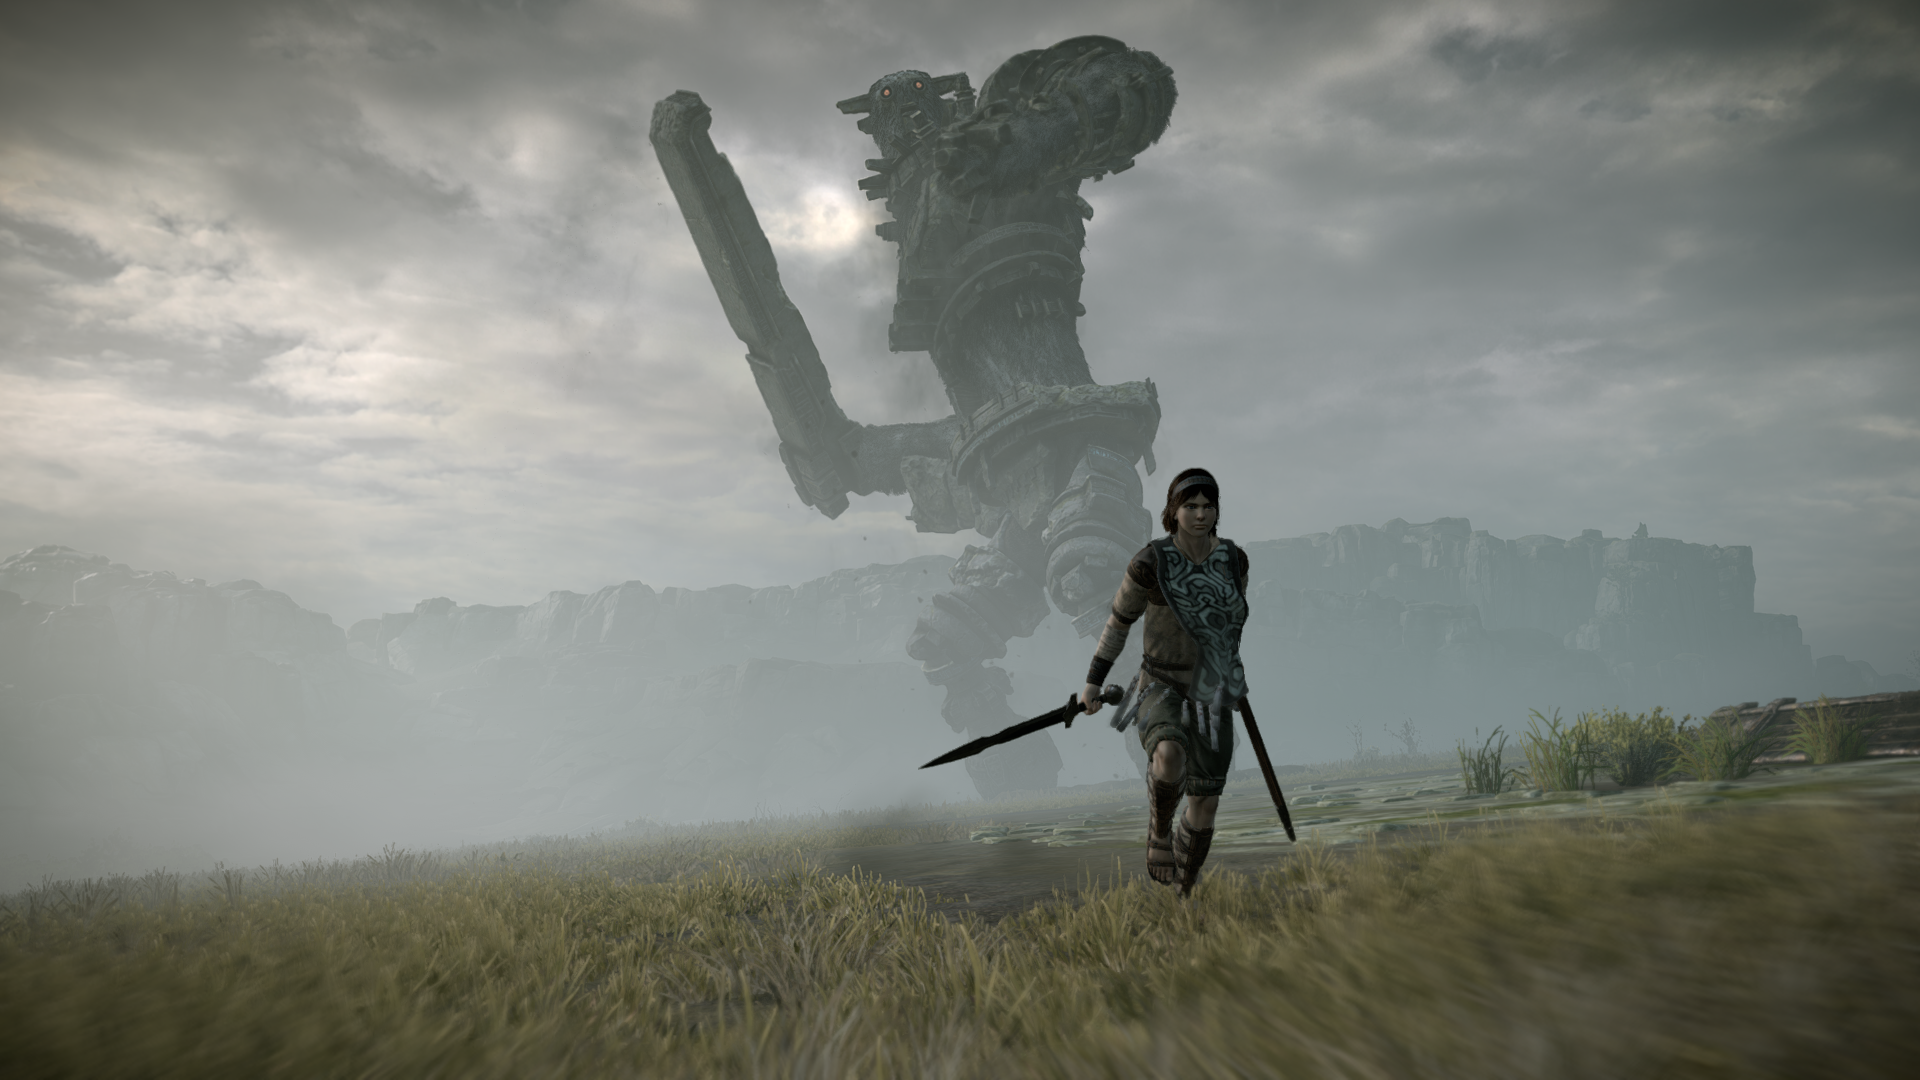 https://www.gamerfocus.co/wp-content/uploads/2018/01/SHADOW-OF-THE-COLOSSUS_20180127173845.png